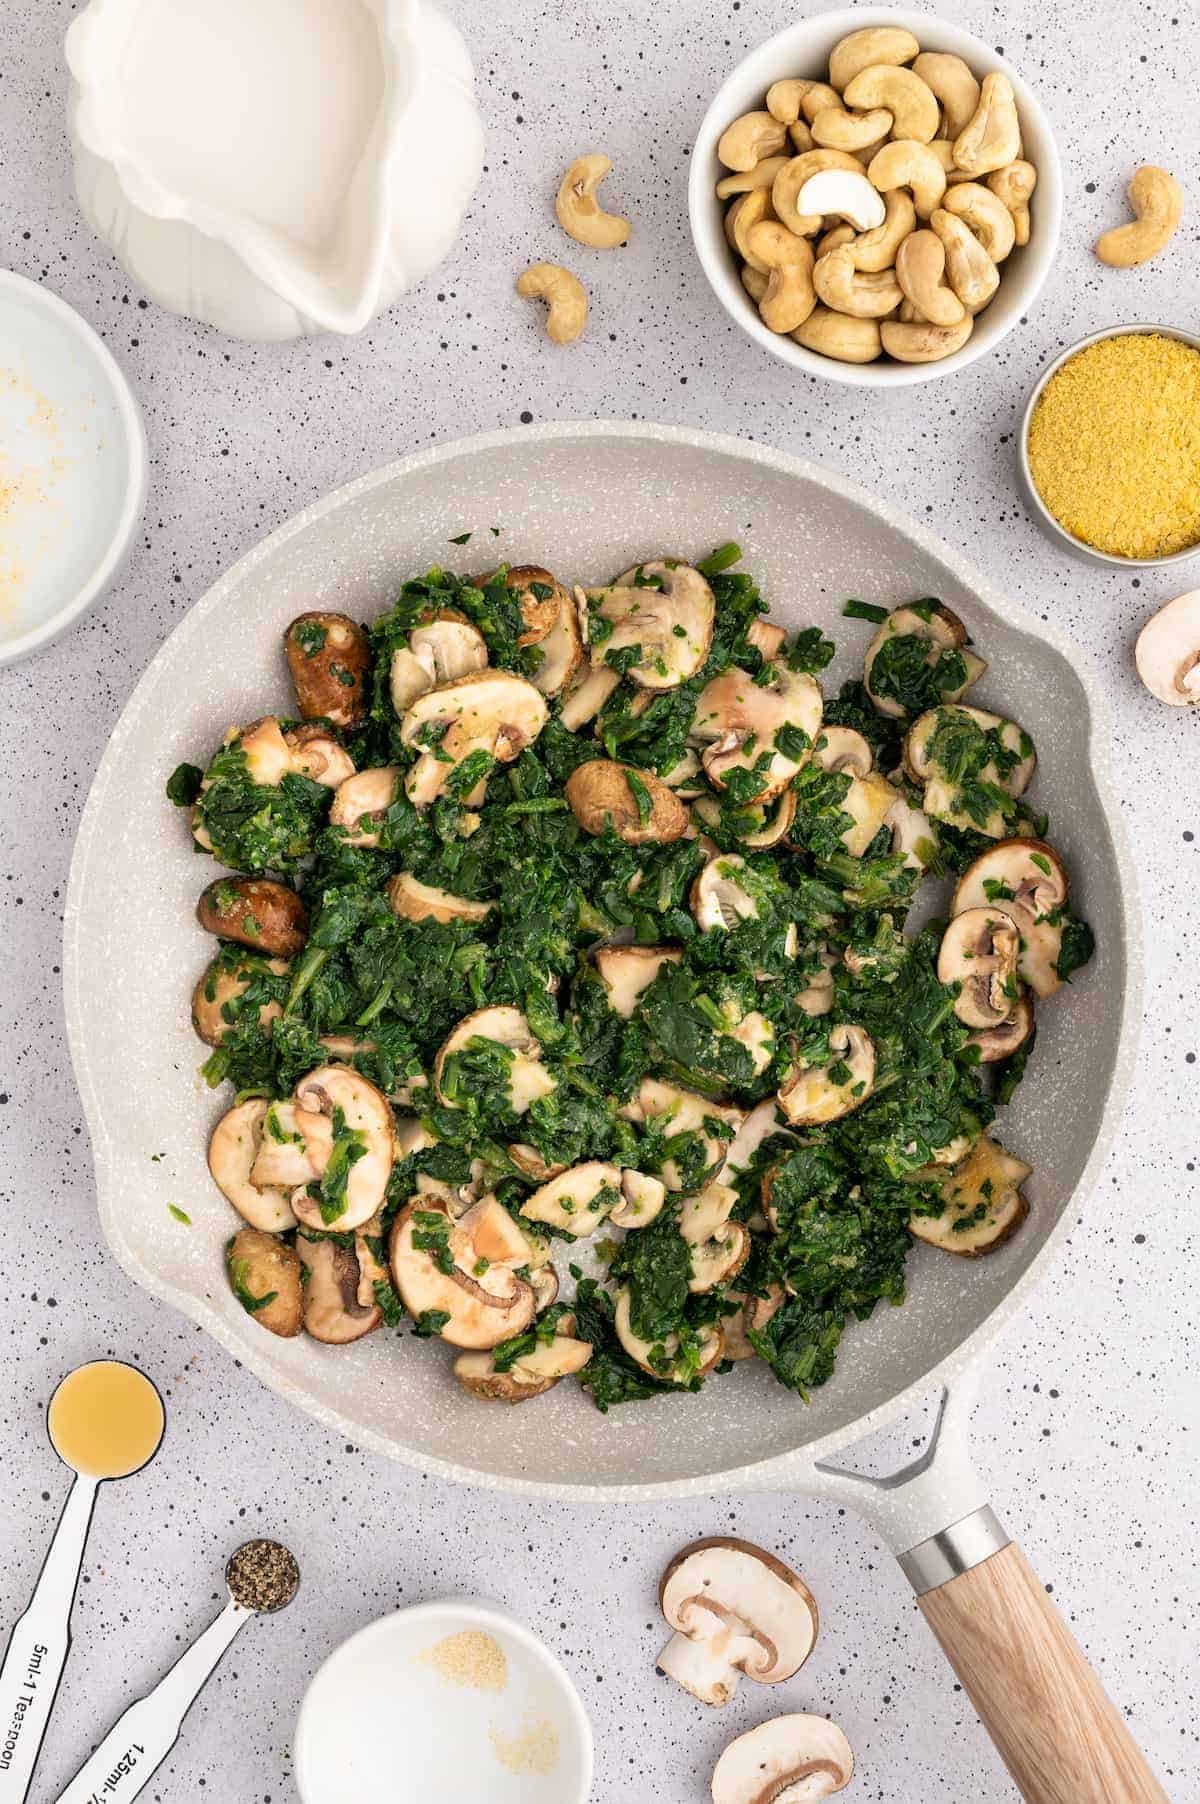 Sautéed mushrooms and spinach in a pan.